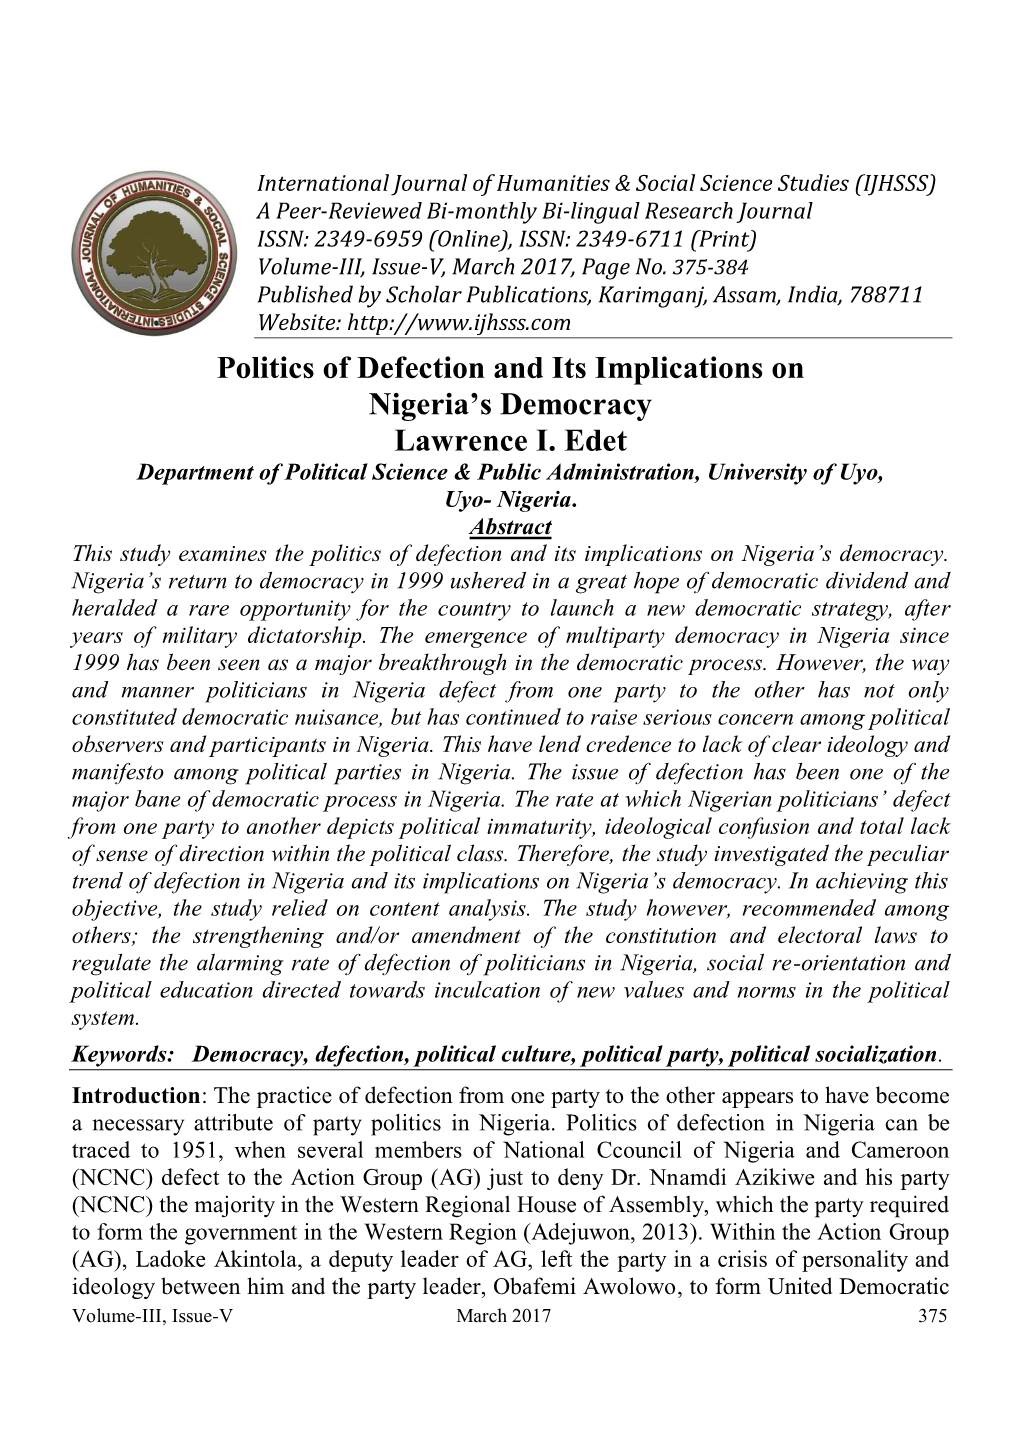 Politics of Defection and Its Implications on Nigeria's Democracy Lawrence I. Edet